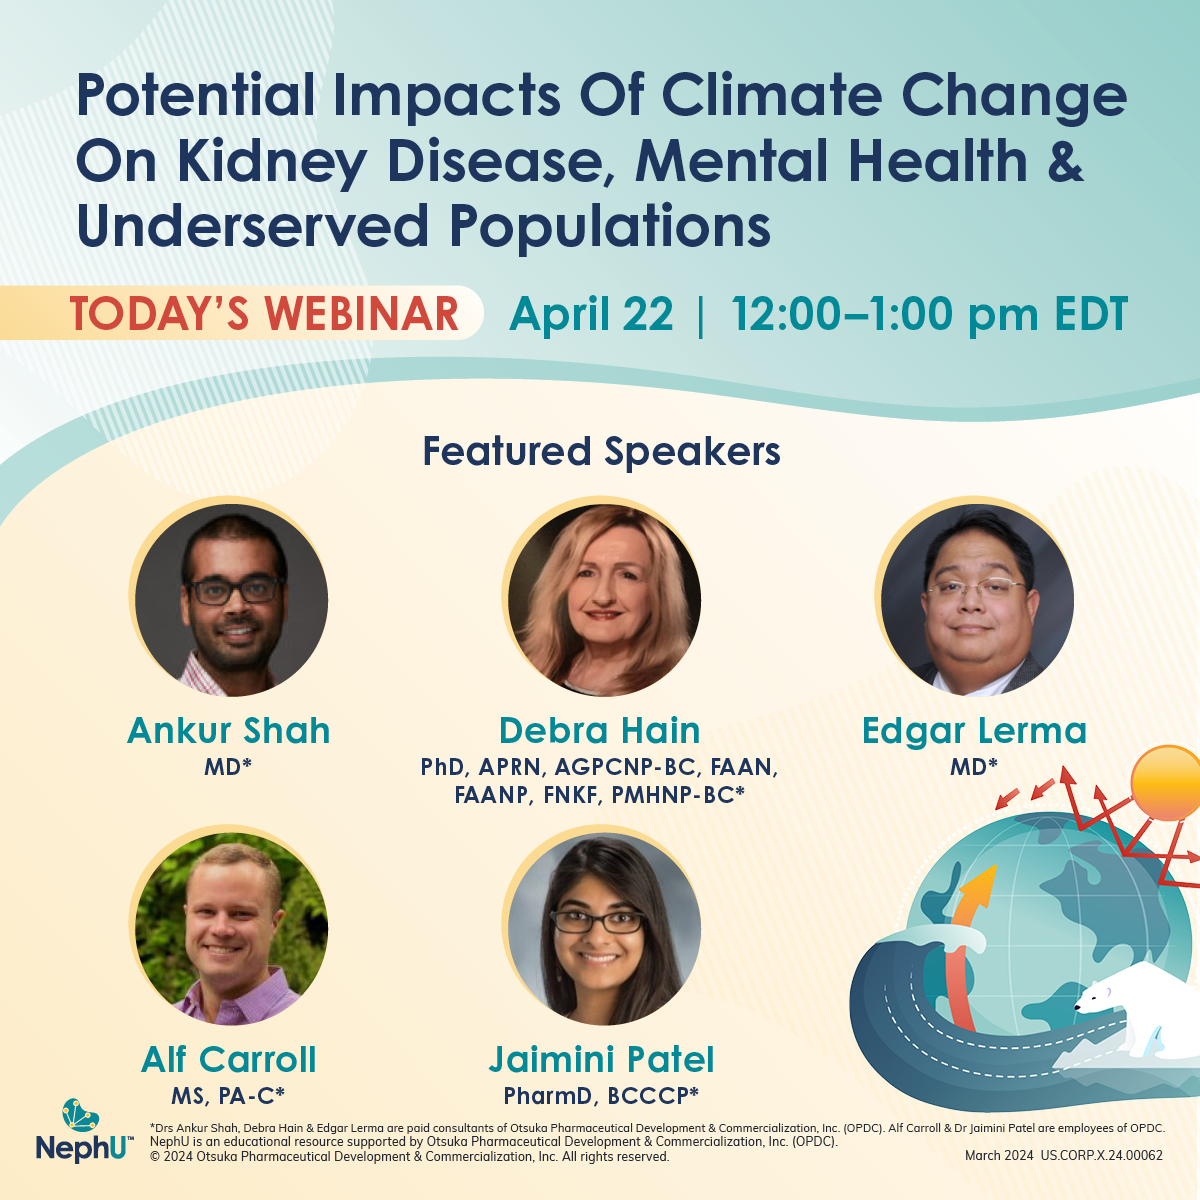 Don't miss out! The 'Potential Impacts of Climate Change On Kidney Disease, Mental Health & Underserved Populations,' webinar is happening today! Register and learn more about this key kidney care topic. go.nephu.org/M5Cn #ClimateChange #NephU #KidneyHealth #mentalhealth